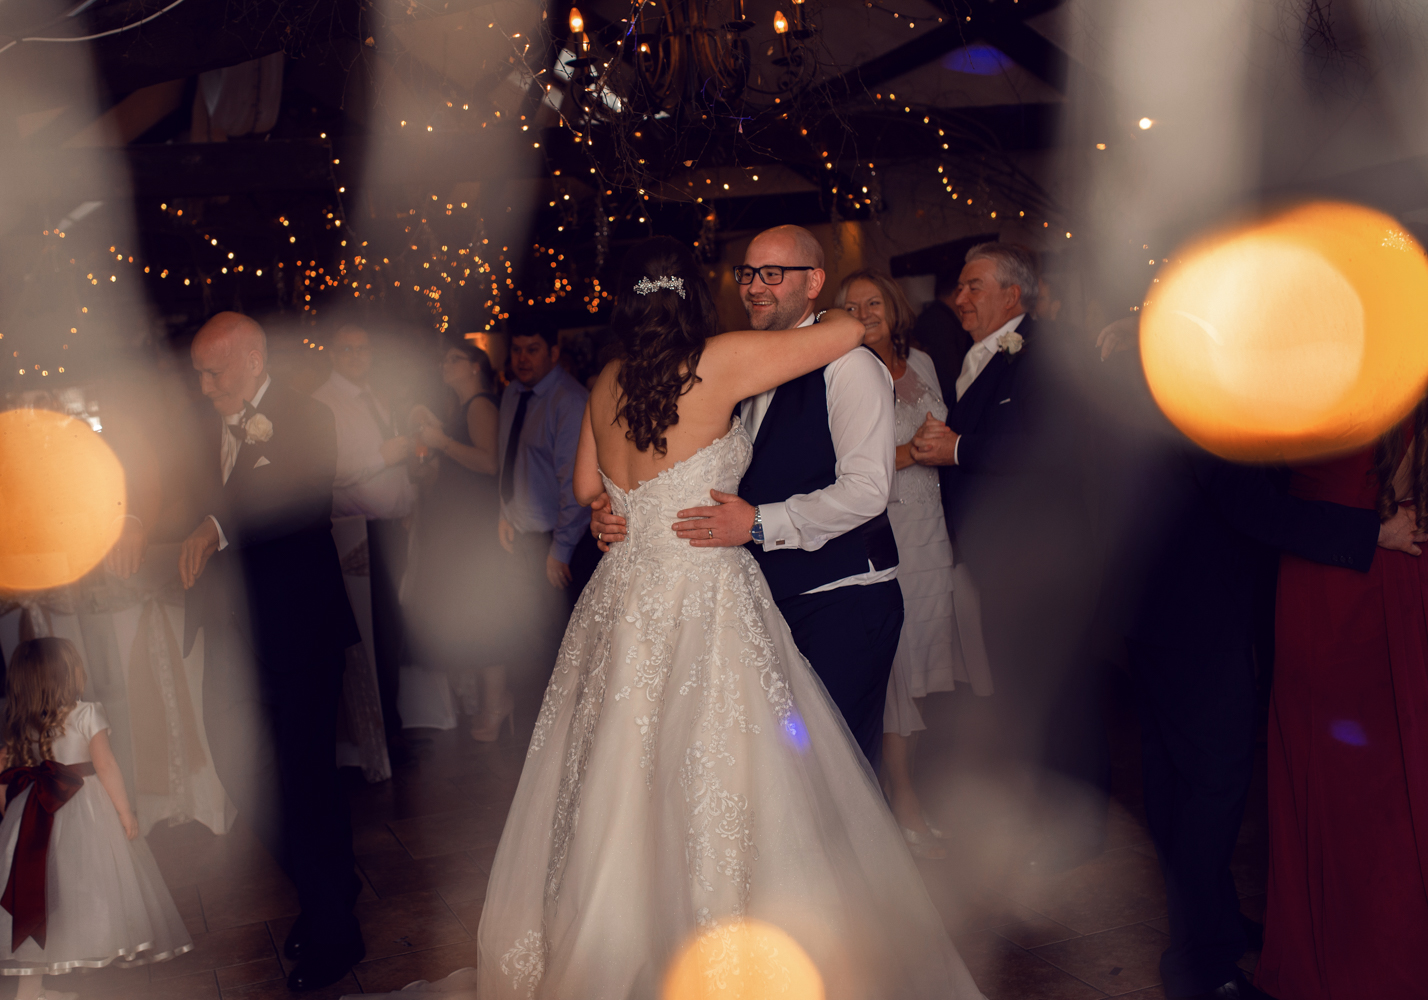 A photo of the bride and groom during the first dance taken though fairy lights